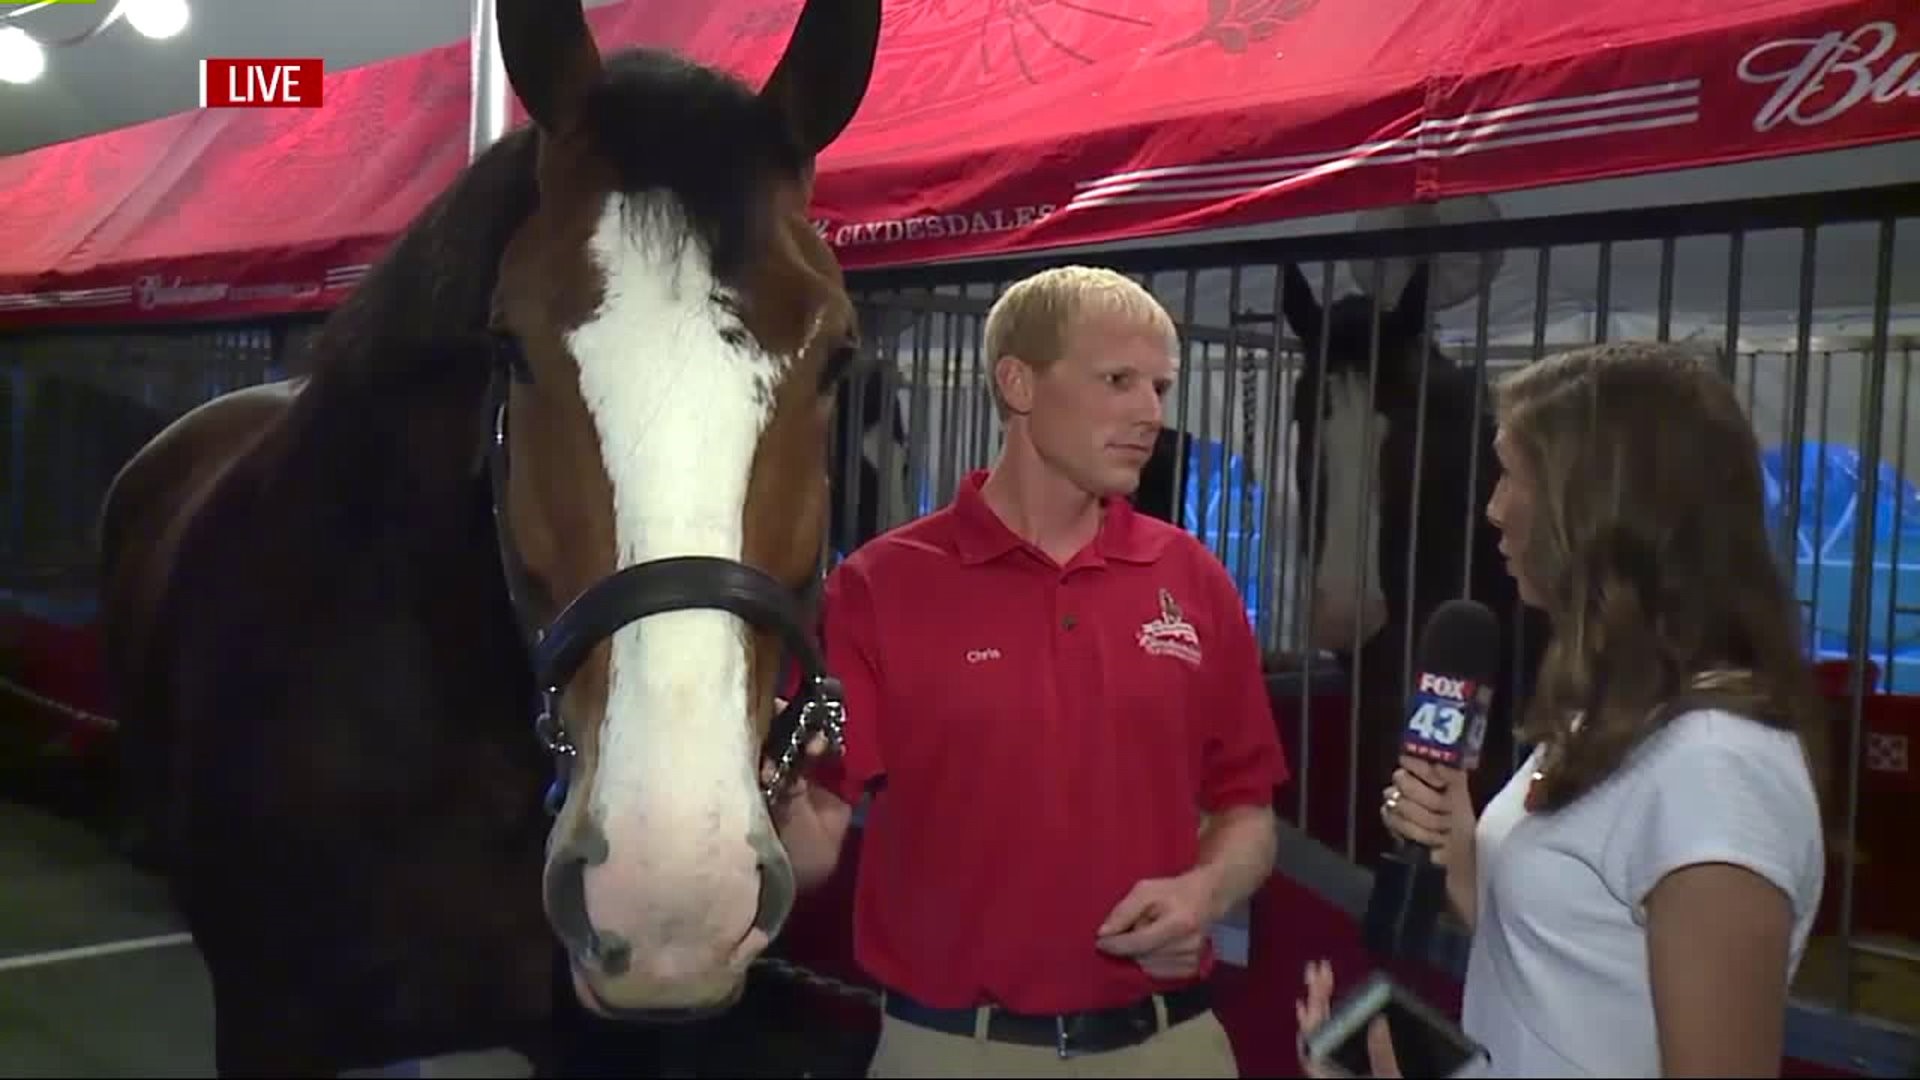 Budweiser Clydesdales come to York for the 19th annual Made In America Tour